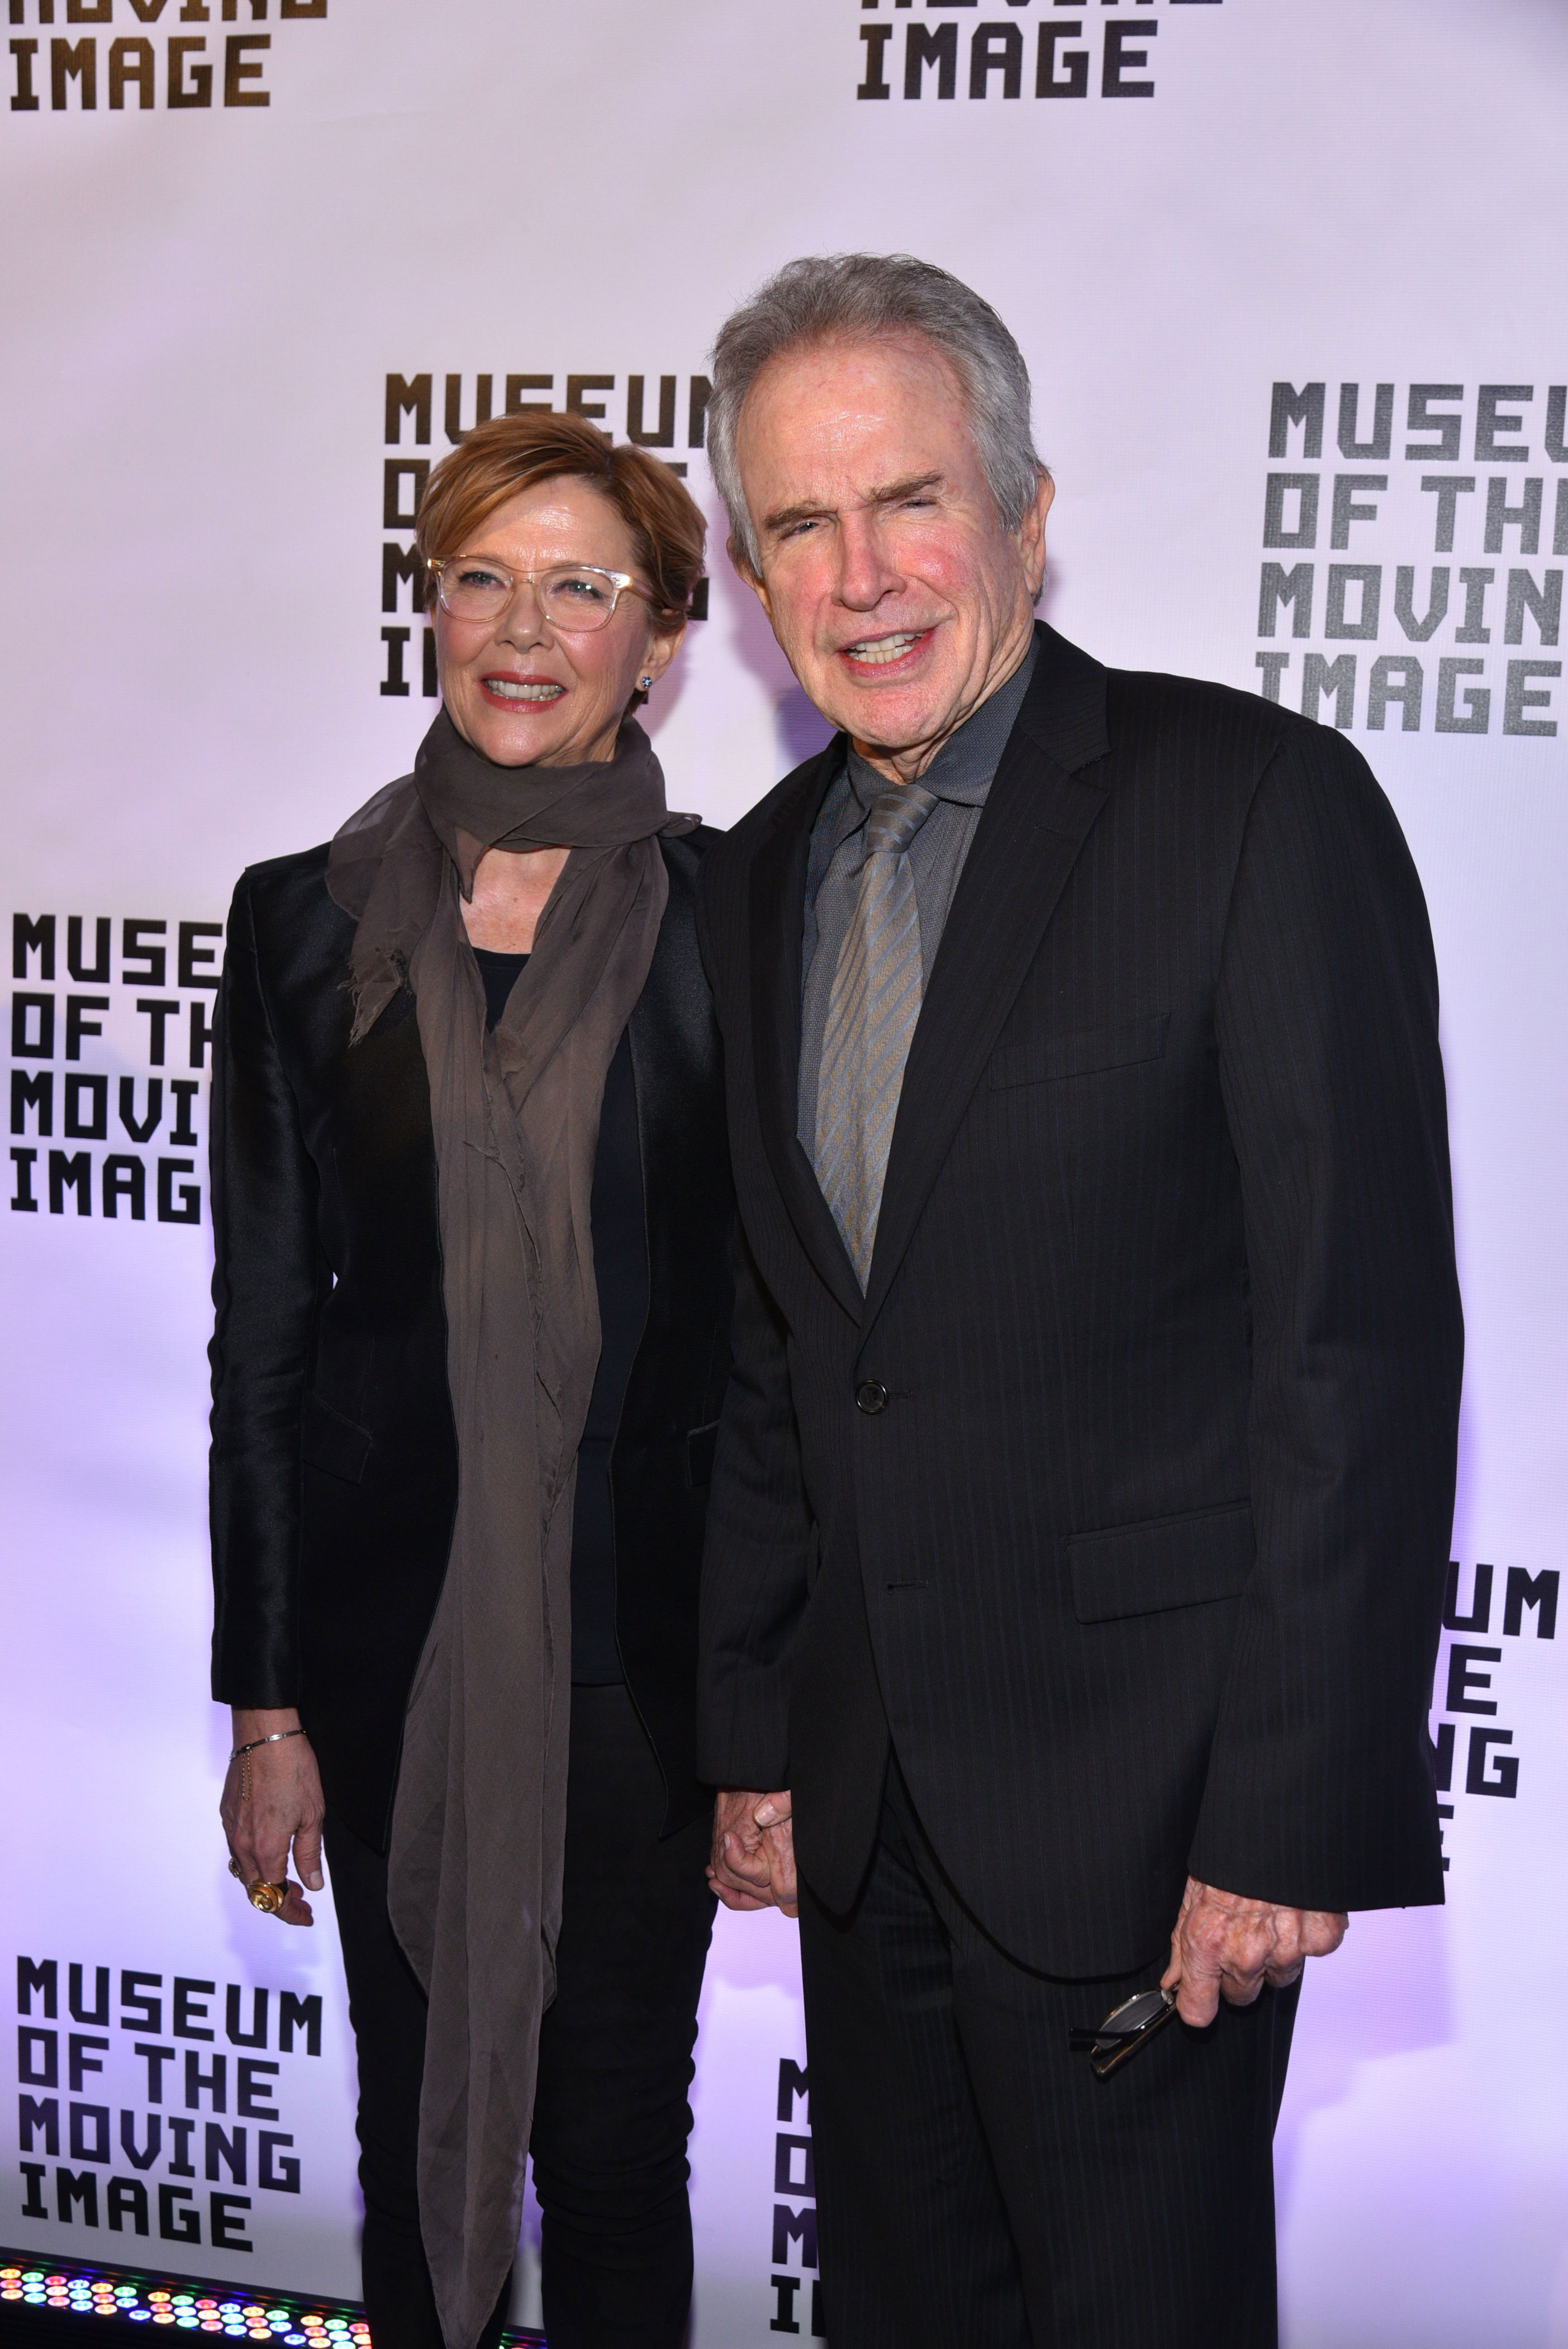 <p>One of the gold standards of age defying romances are Warren Beatty and Annette Bening. The longtime couple is 21 years apart in age. They first met in 1991 while filming "Bugsy." They married a year later, and they now have four kids together.</p>